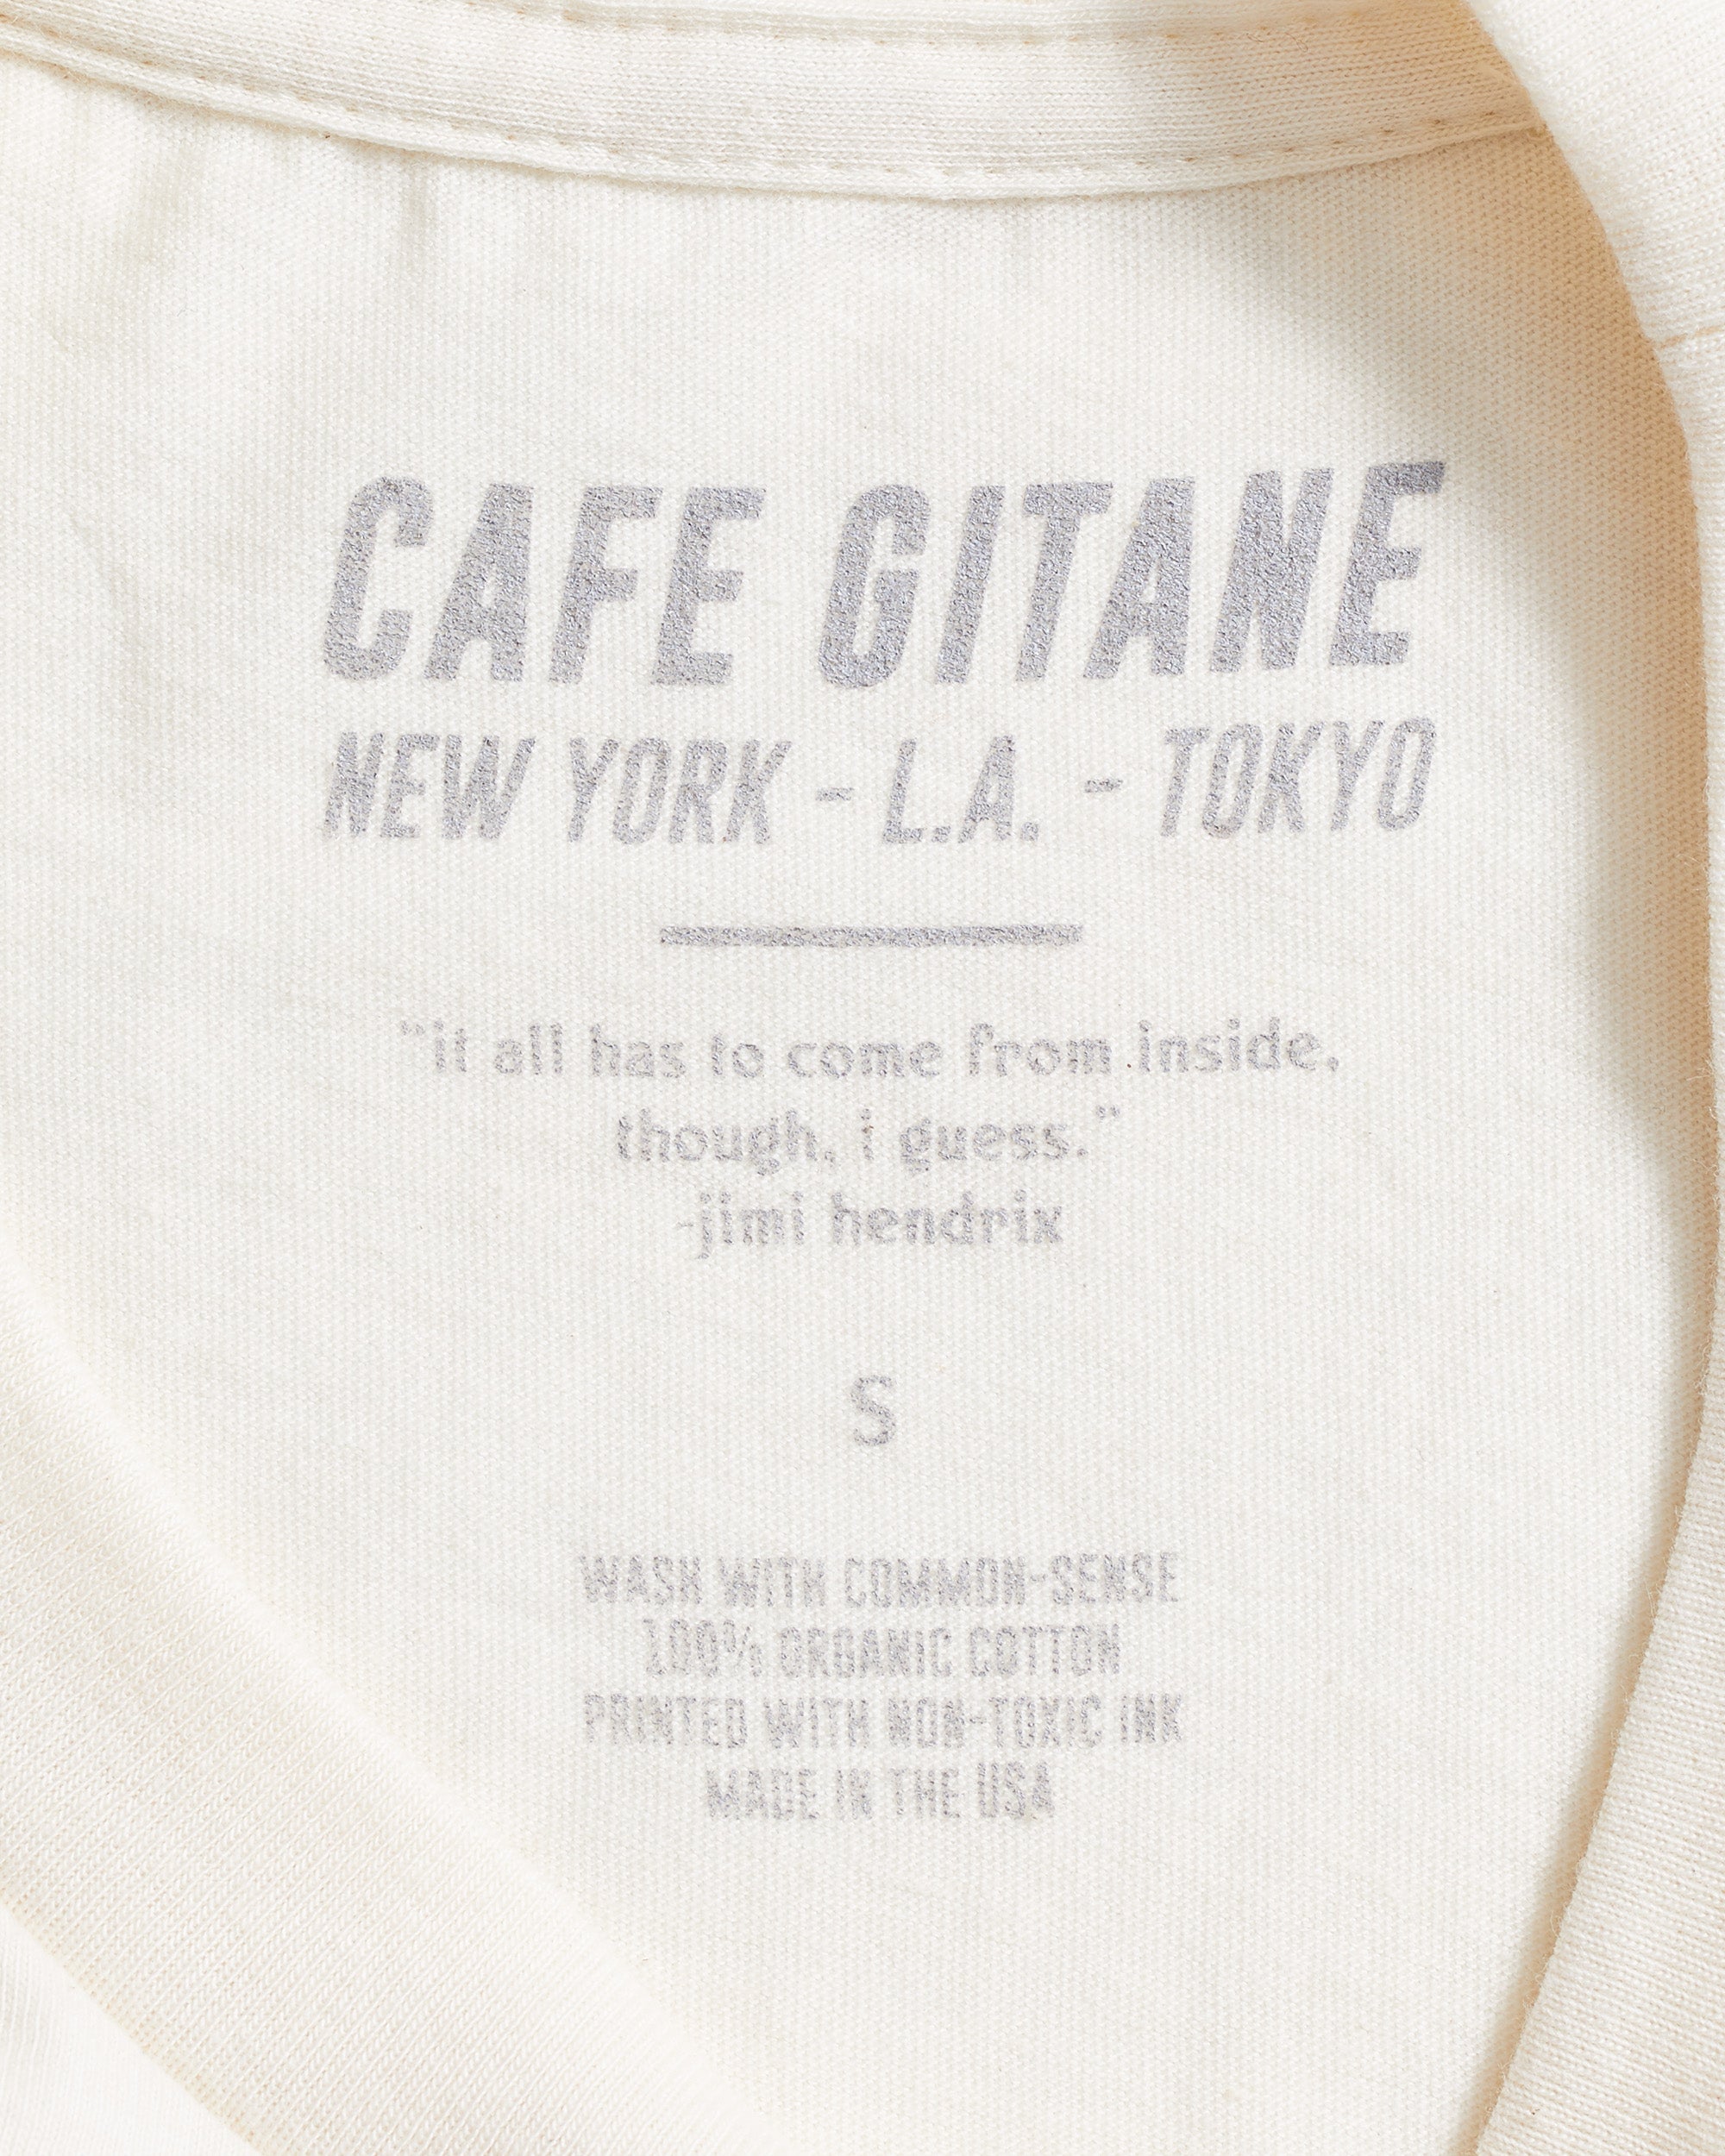 The Cafe Gitane 100% organic cotton t-shirt in green has a printed inside tag. It show the care instruction, that it is made in the USA and includes a Jimi Hendrix Quote.  It also has the Cafe Gitane logo and stated the cities it has locations in: New York, Los Angeles, and Tokyo. 